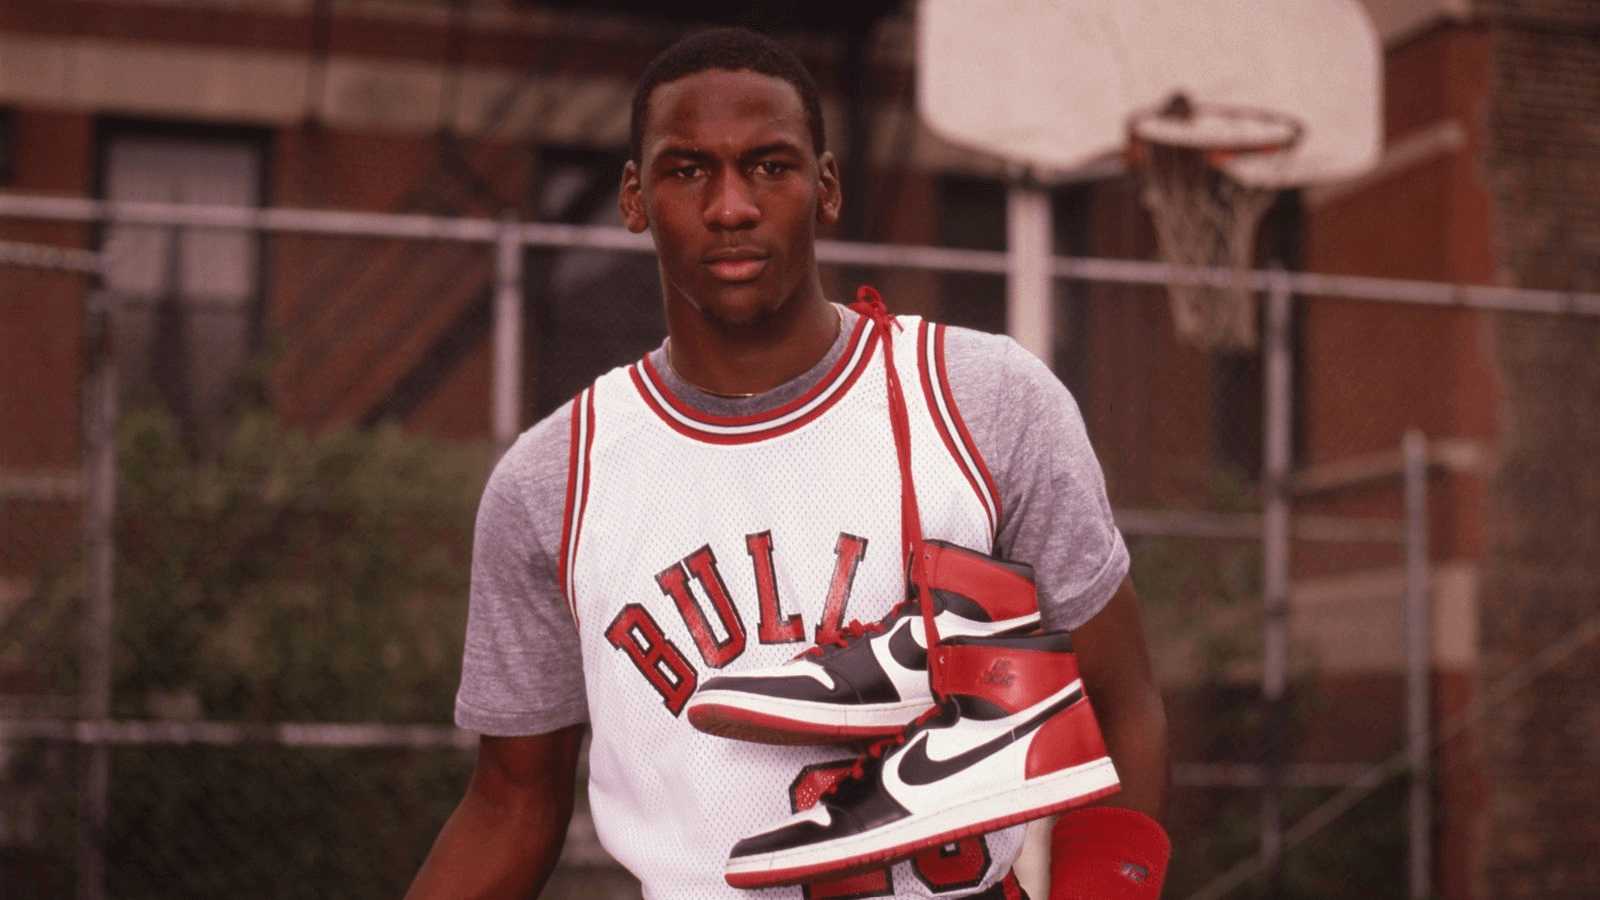 Famous basketball player MJ is the symbol of this shoe line